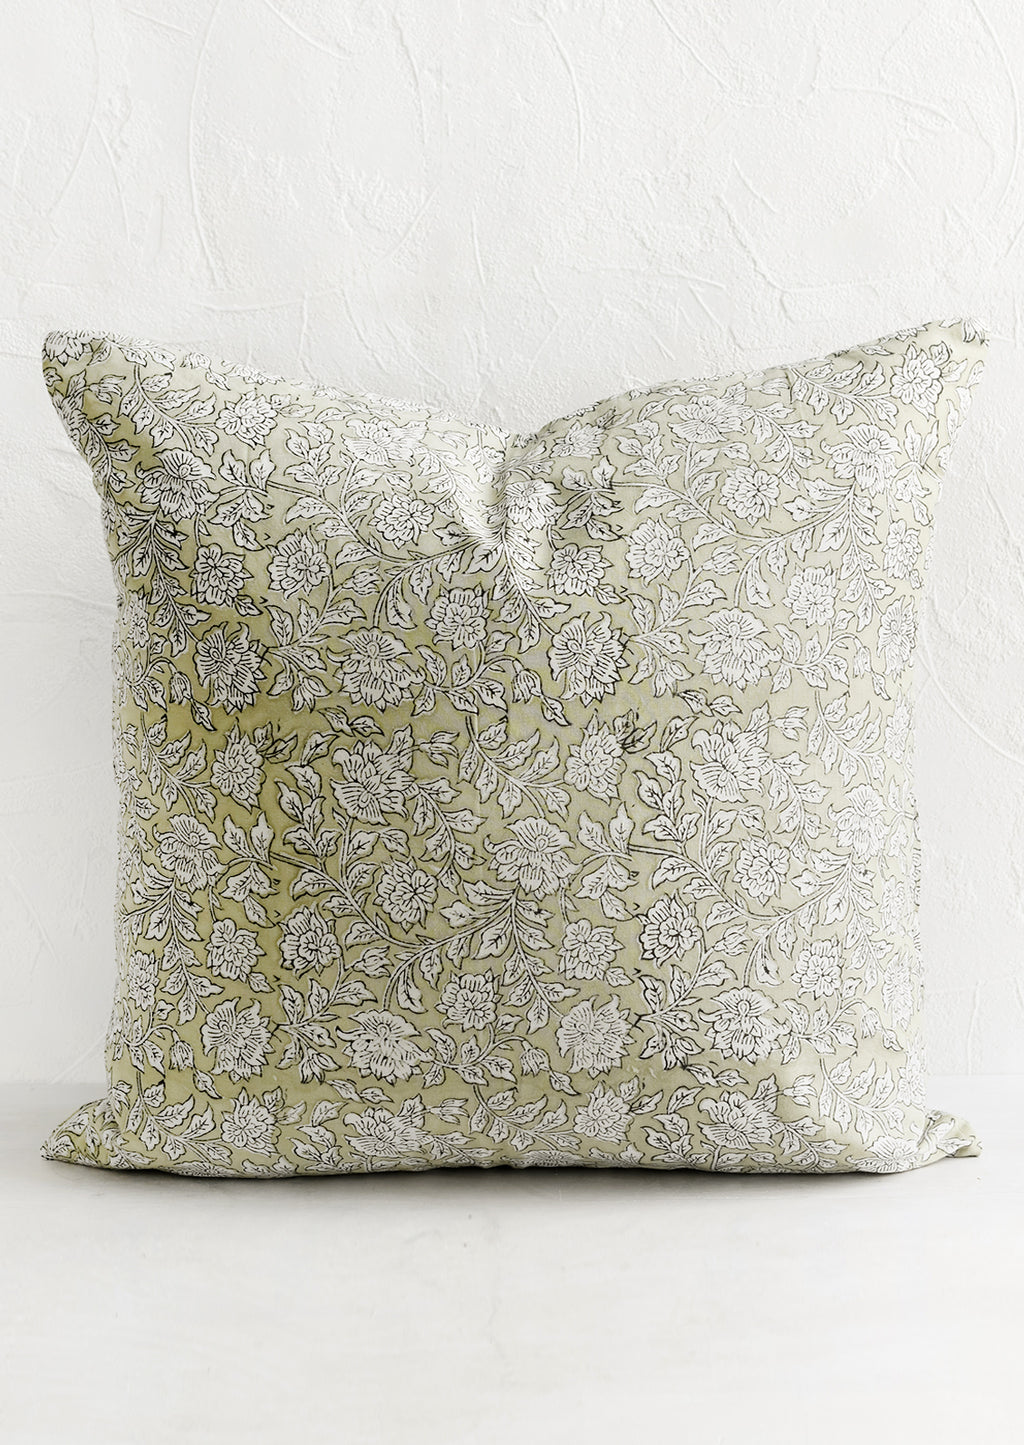 1: A throw pillow in greige floral block print fabric.